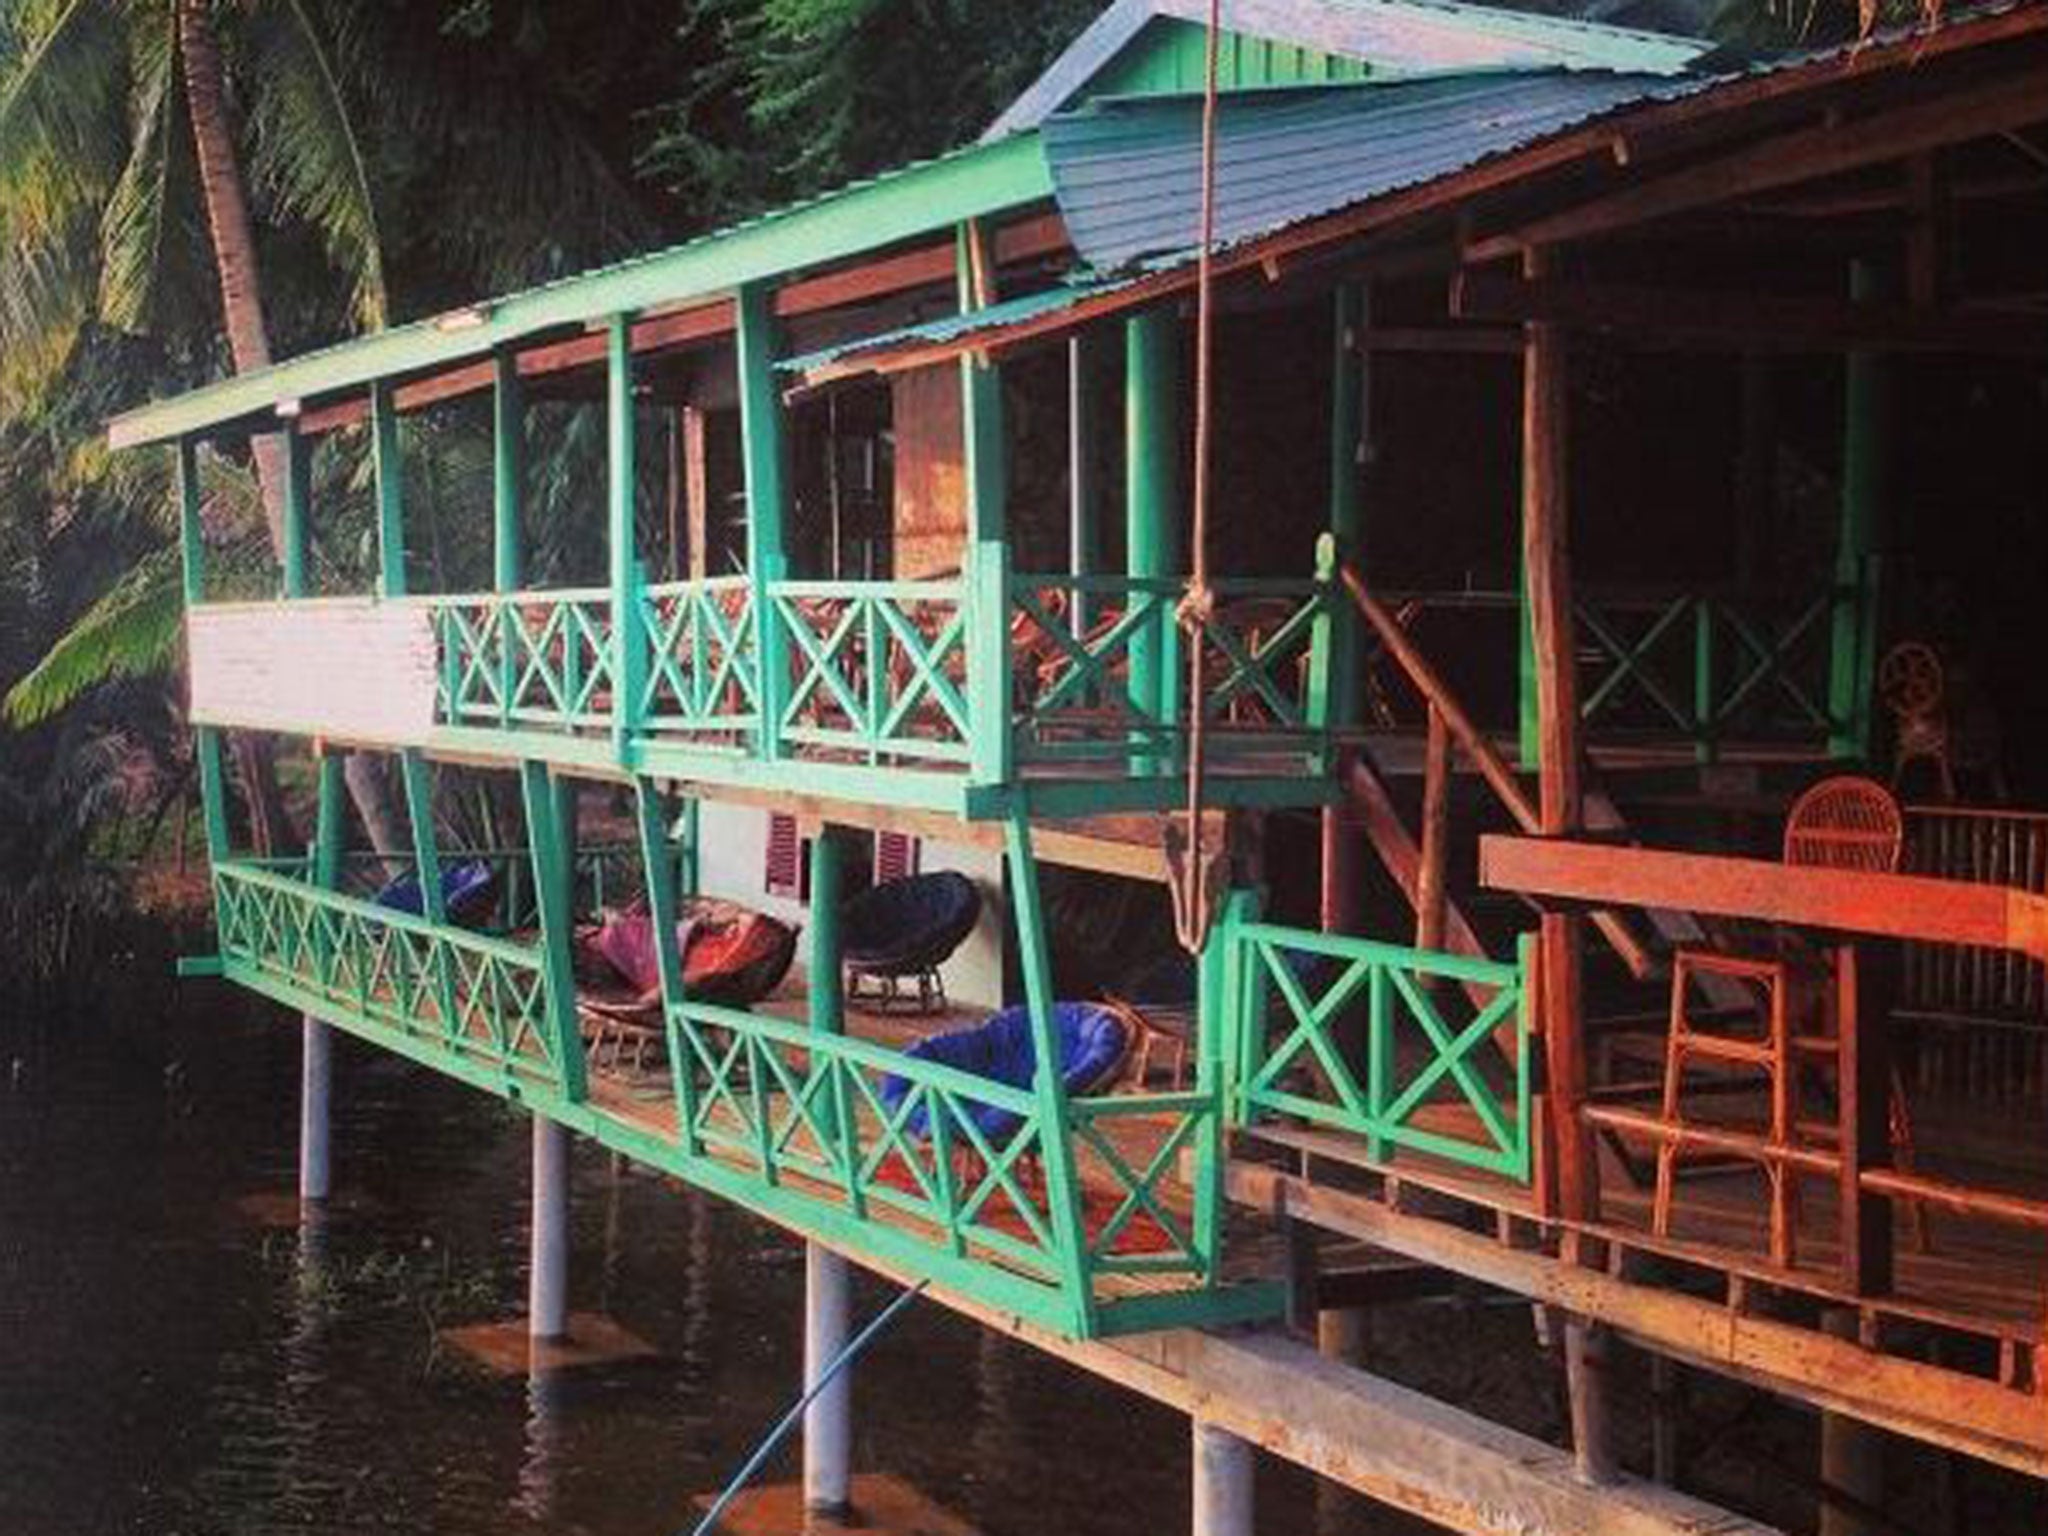 Arcadia Backpackers, in Kampot, where the attack is alleged to have happened (Tripadvisor)